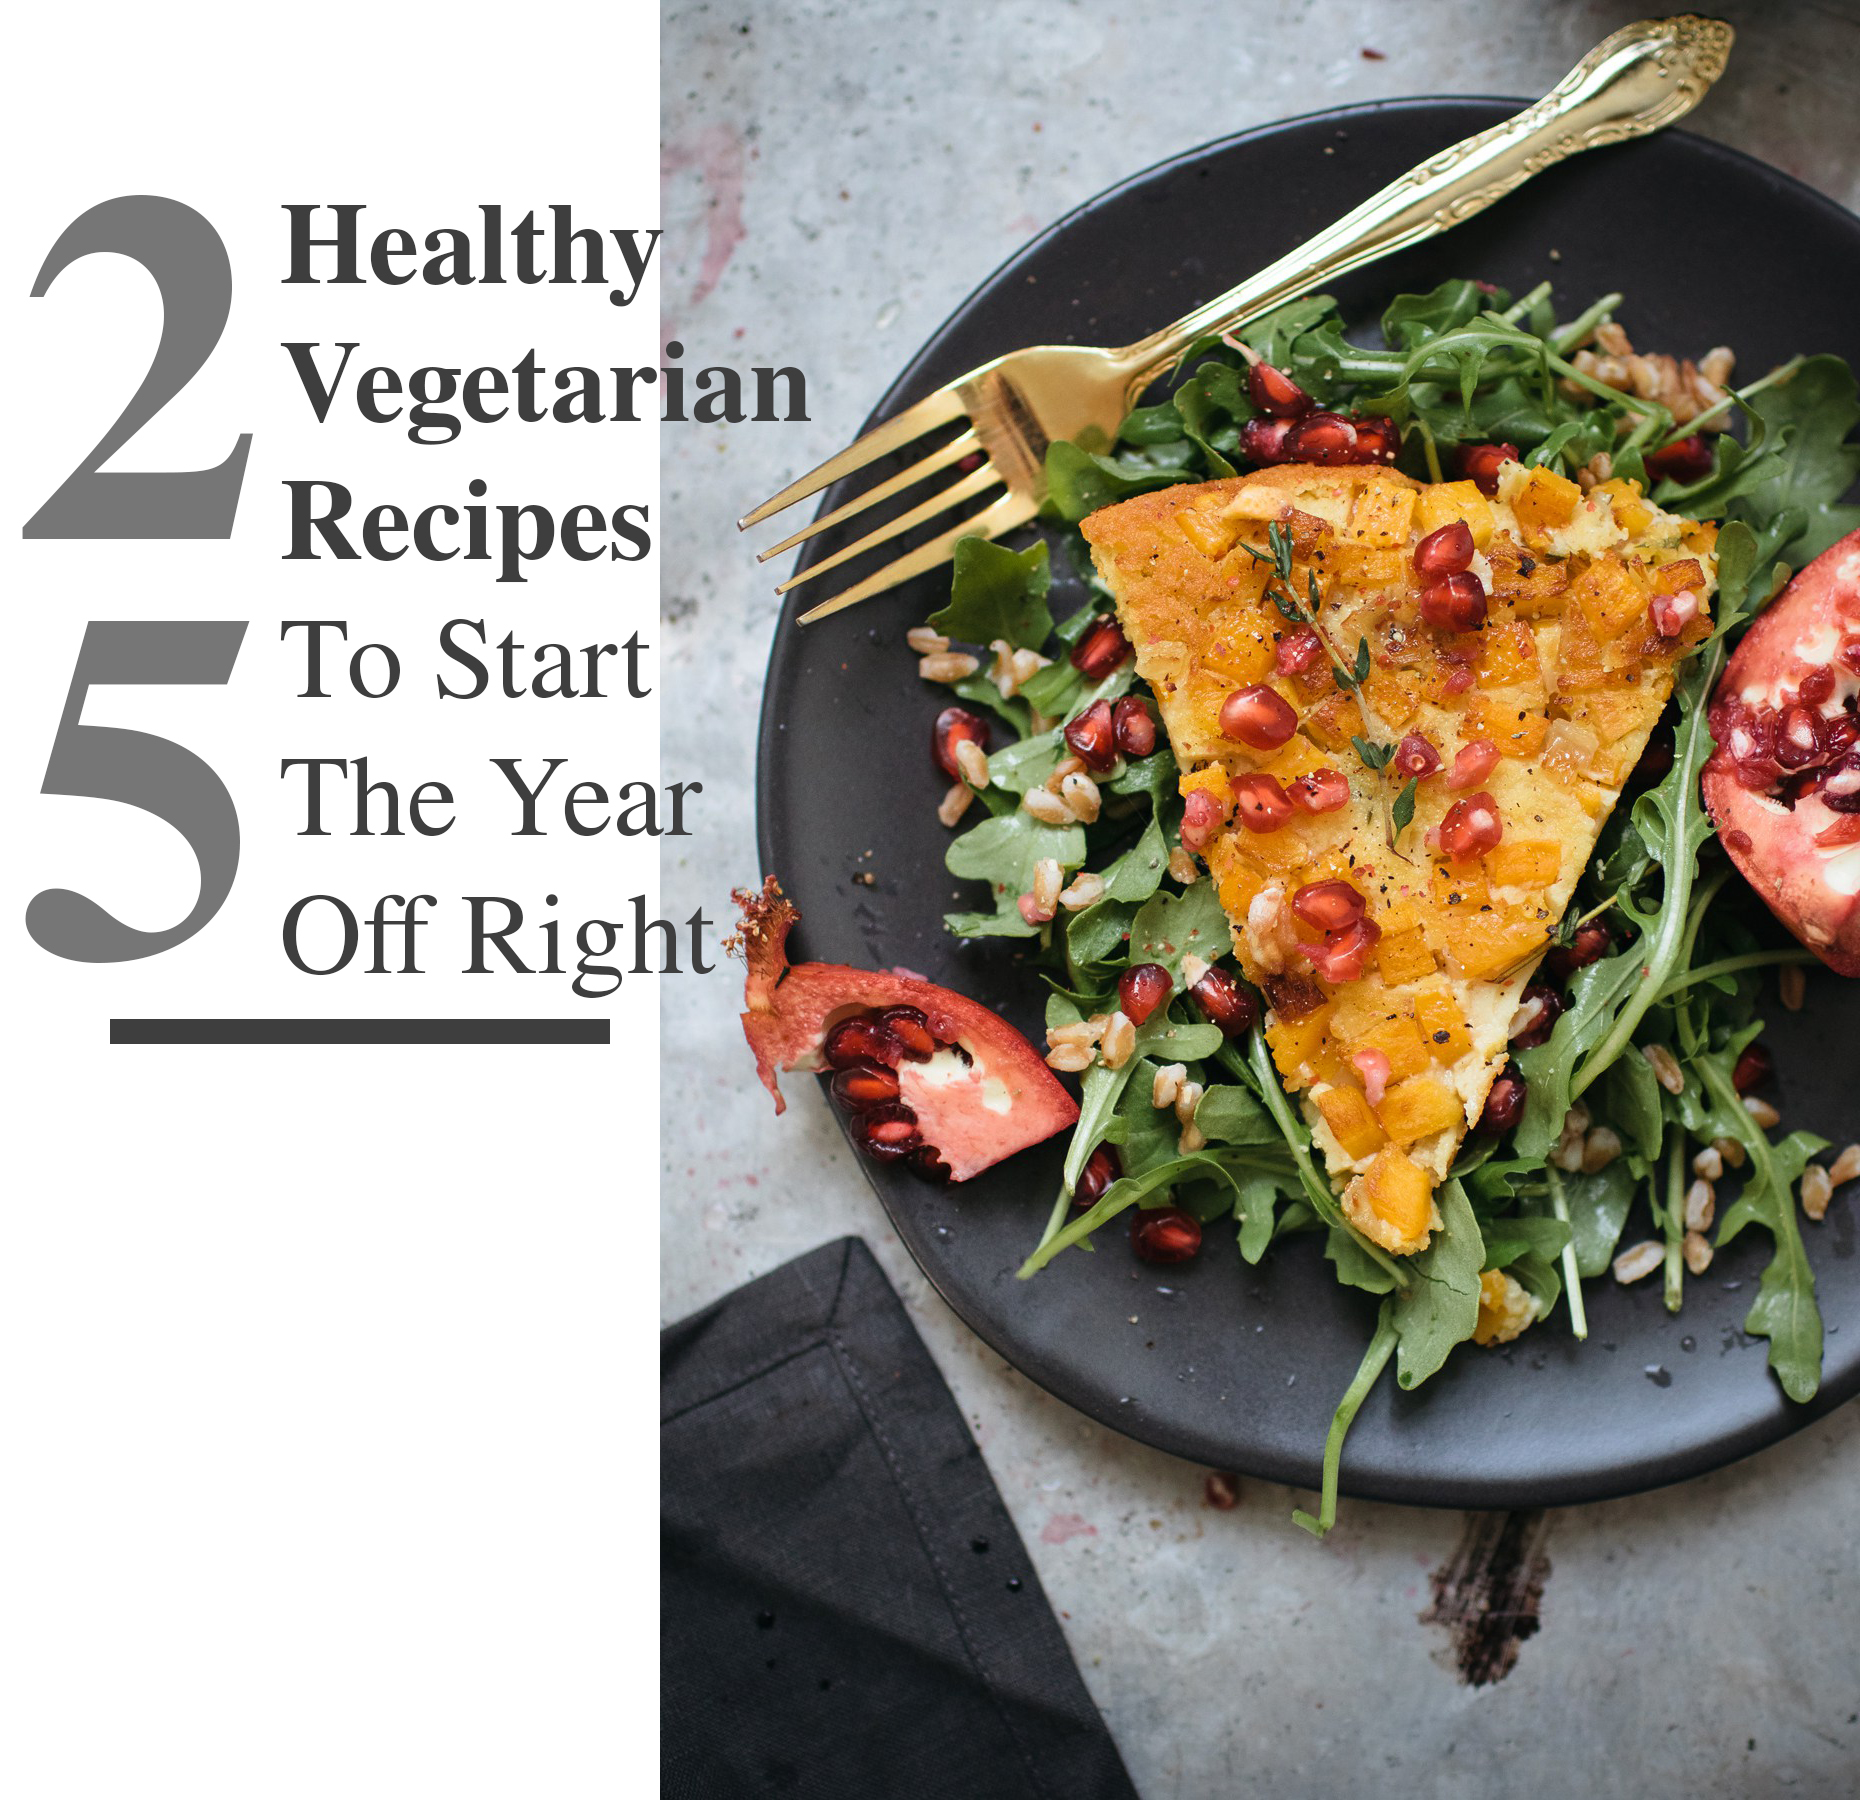 25 Healthy Vegetarian Recipes To Start The Year Right